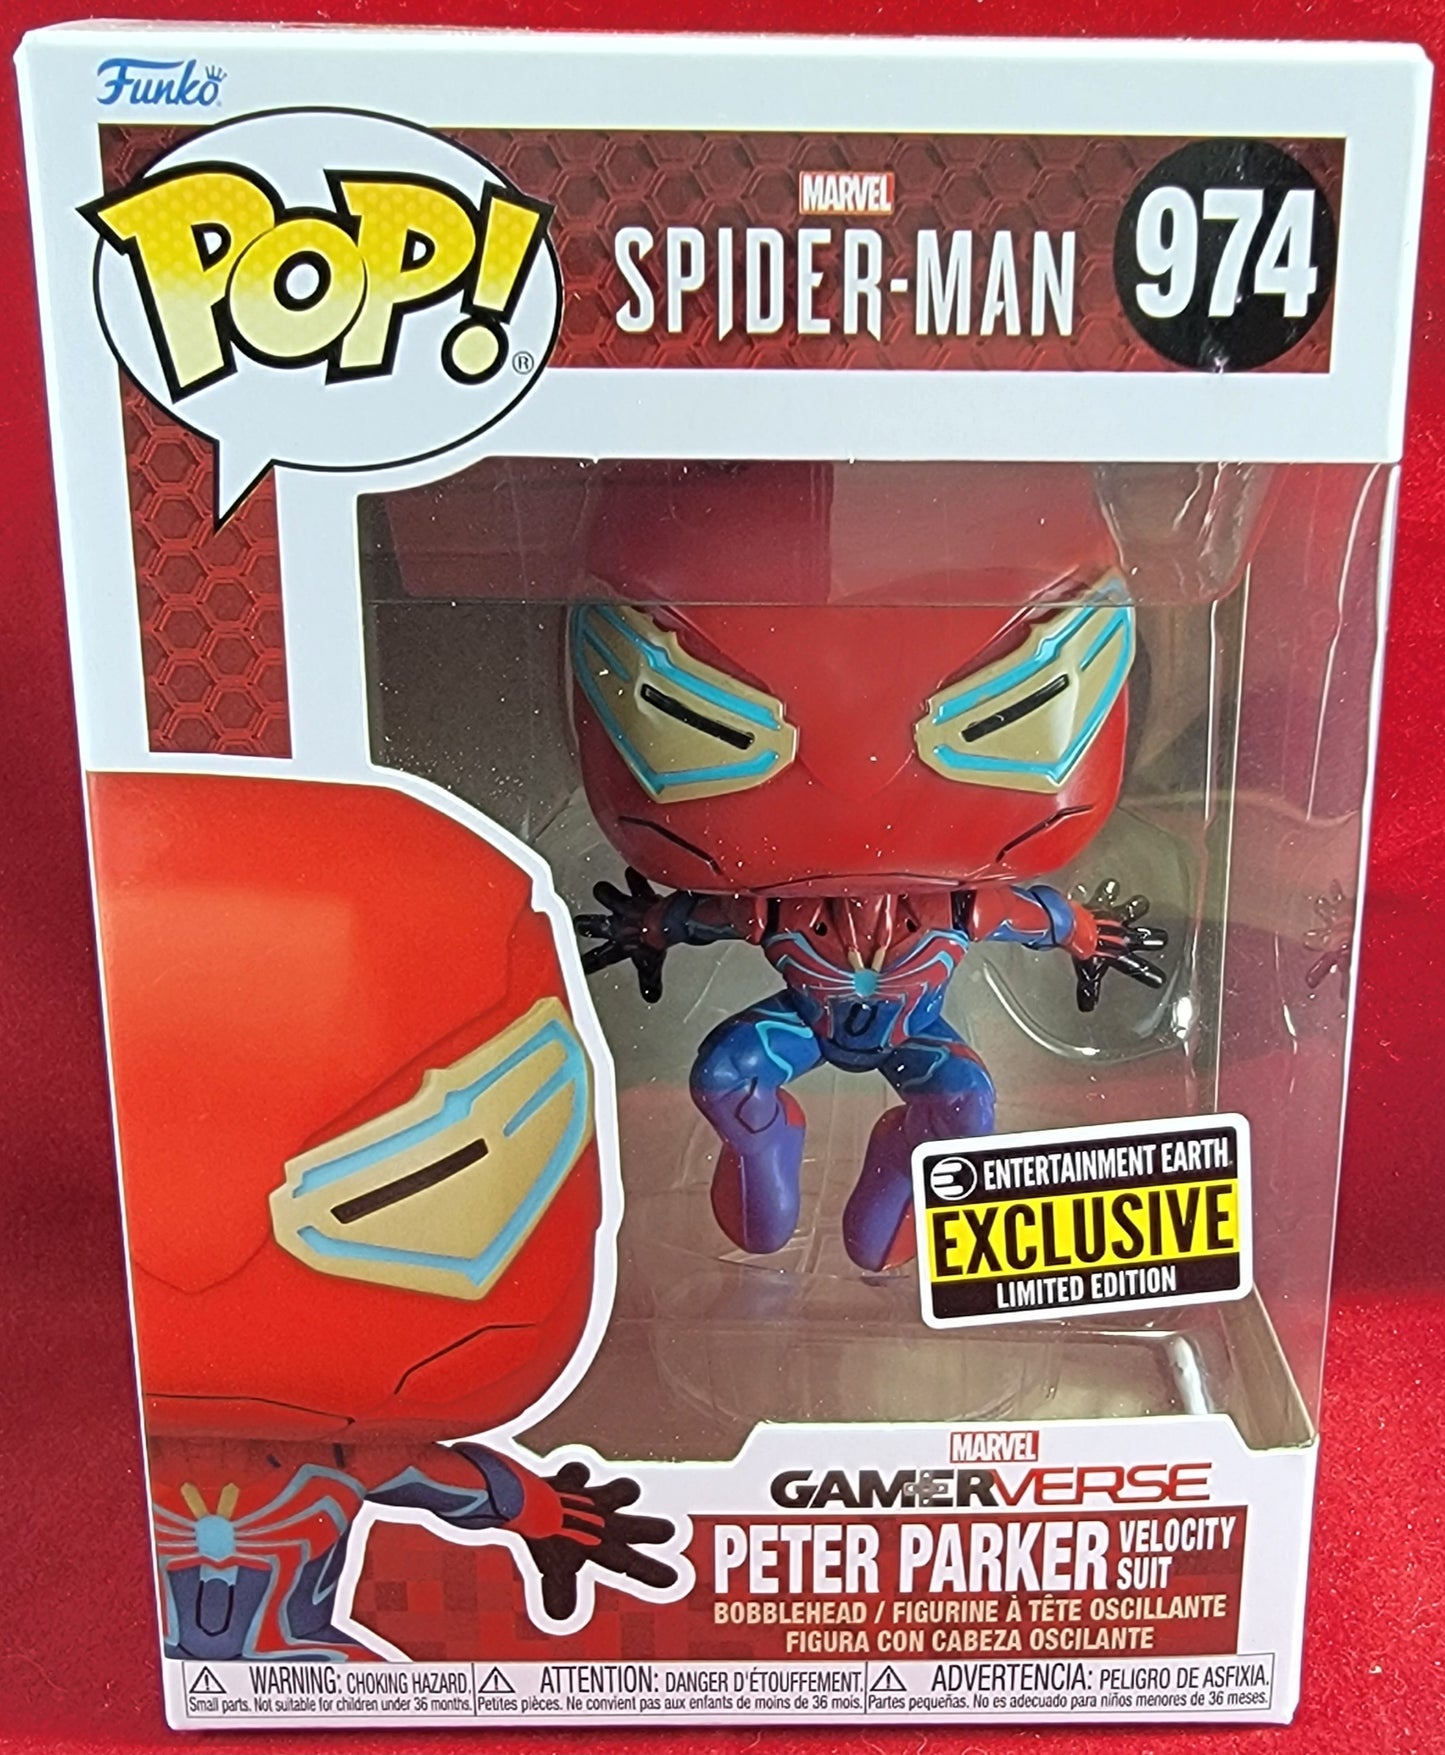 Peter parker velocity suit funko # 974 (nib)
With pop protector